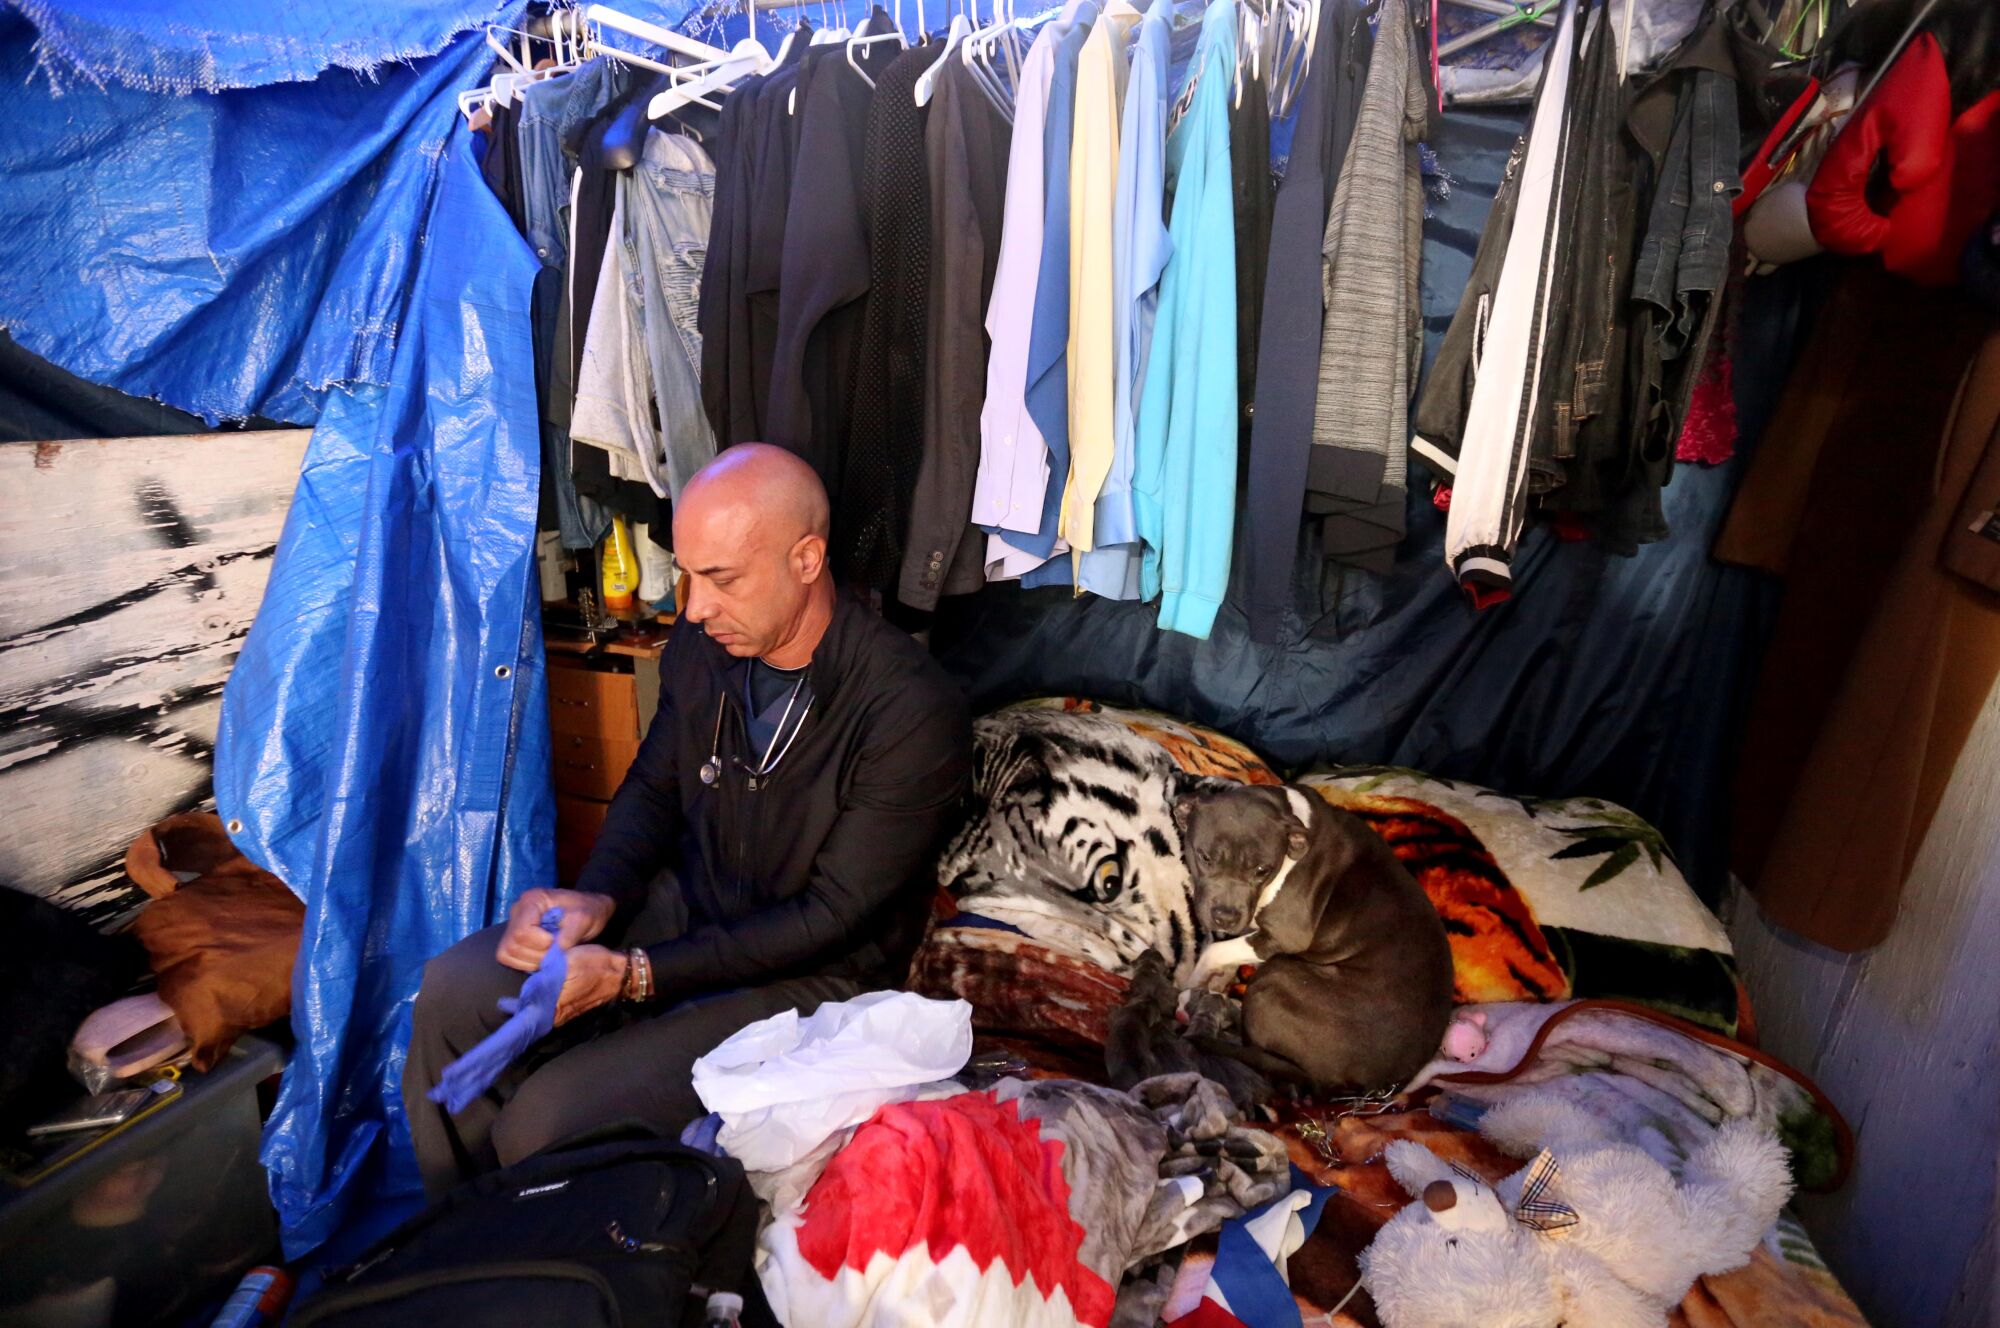 A man sits on a mattress alongside a tarp and clothes hanging from a rod. Beside him on the bed a dog is curled up.